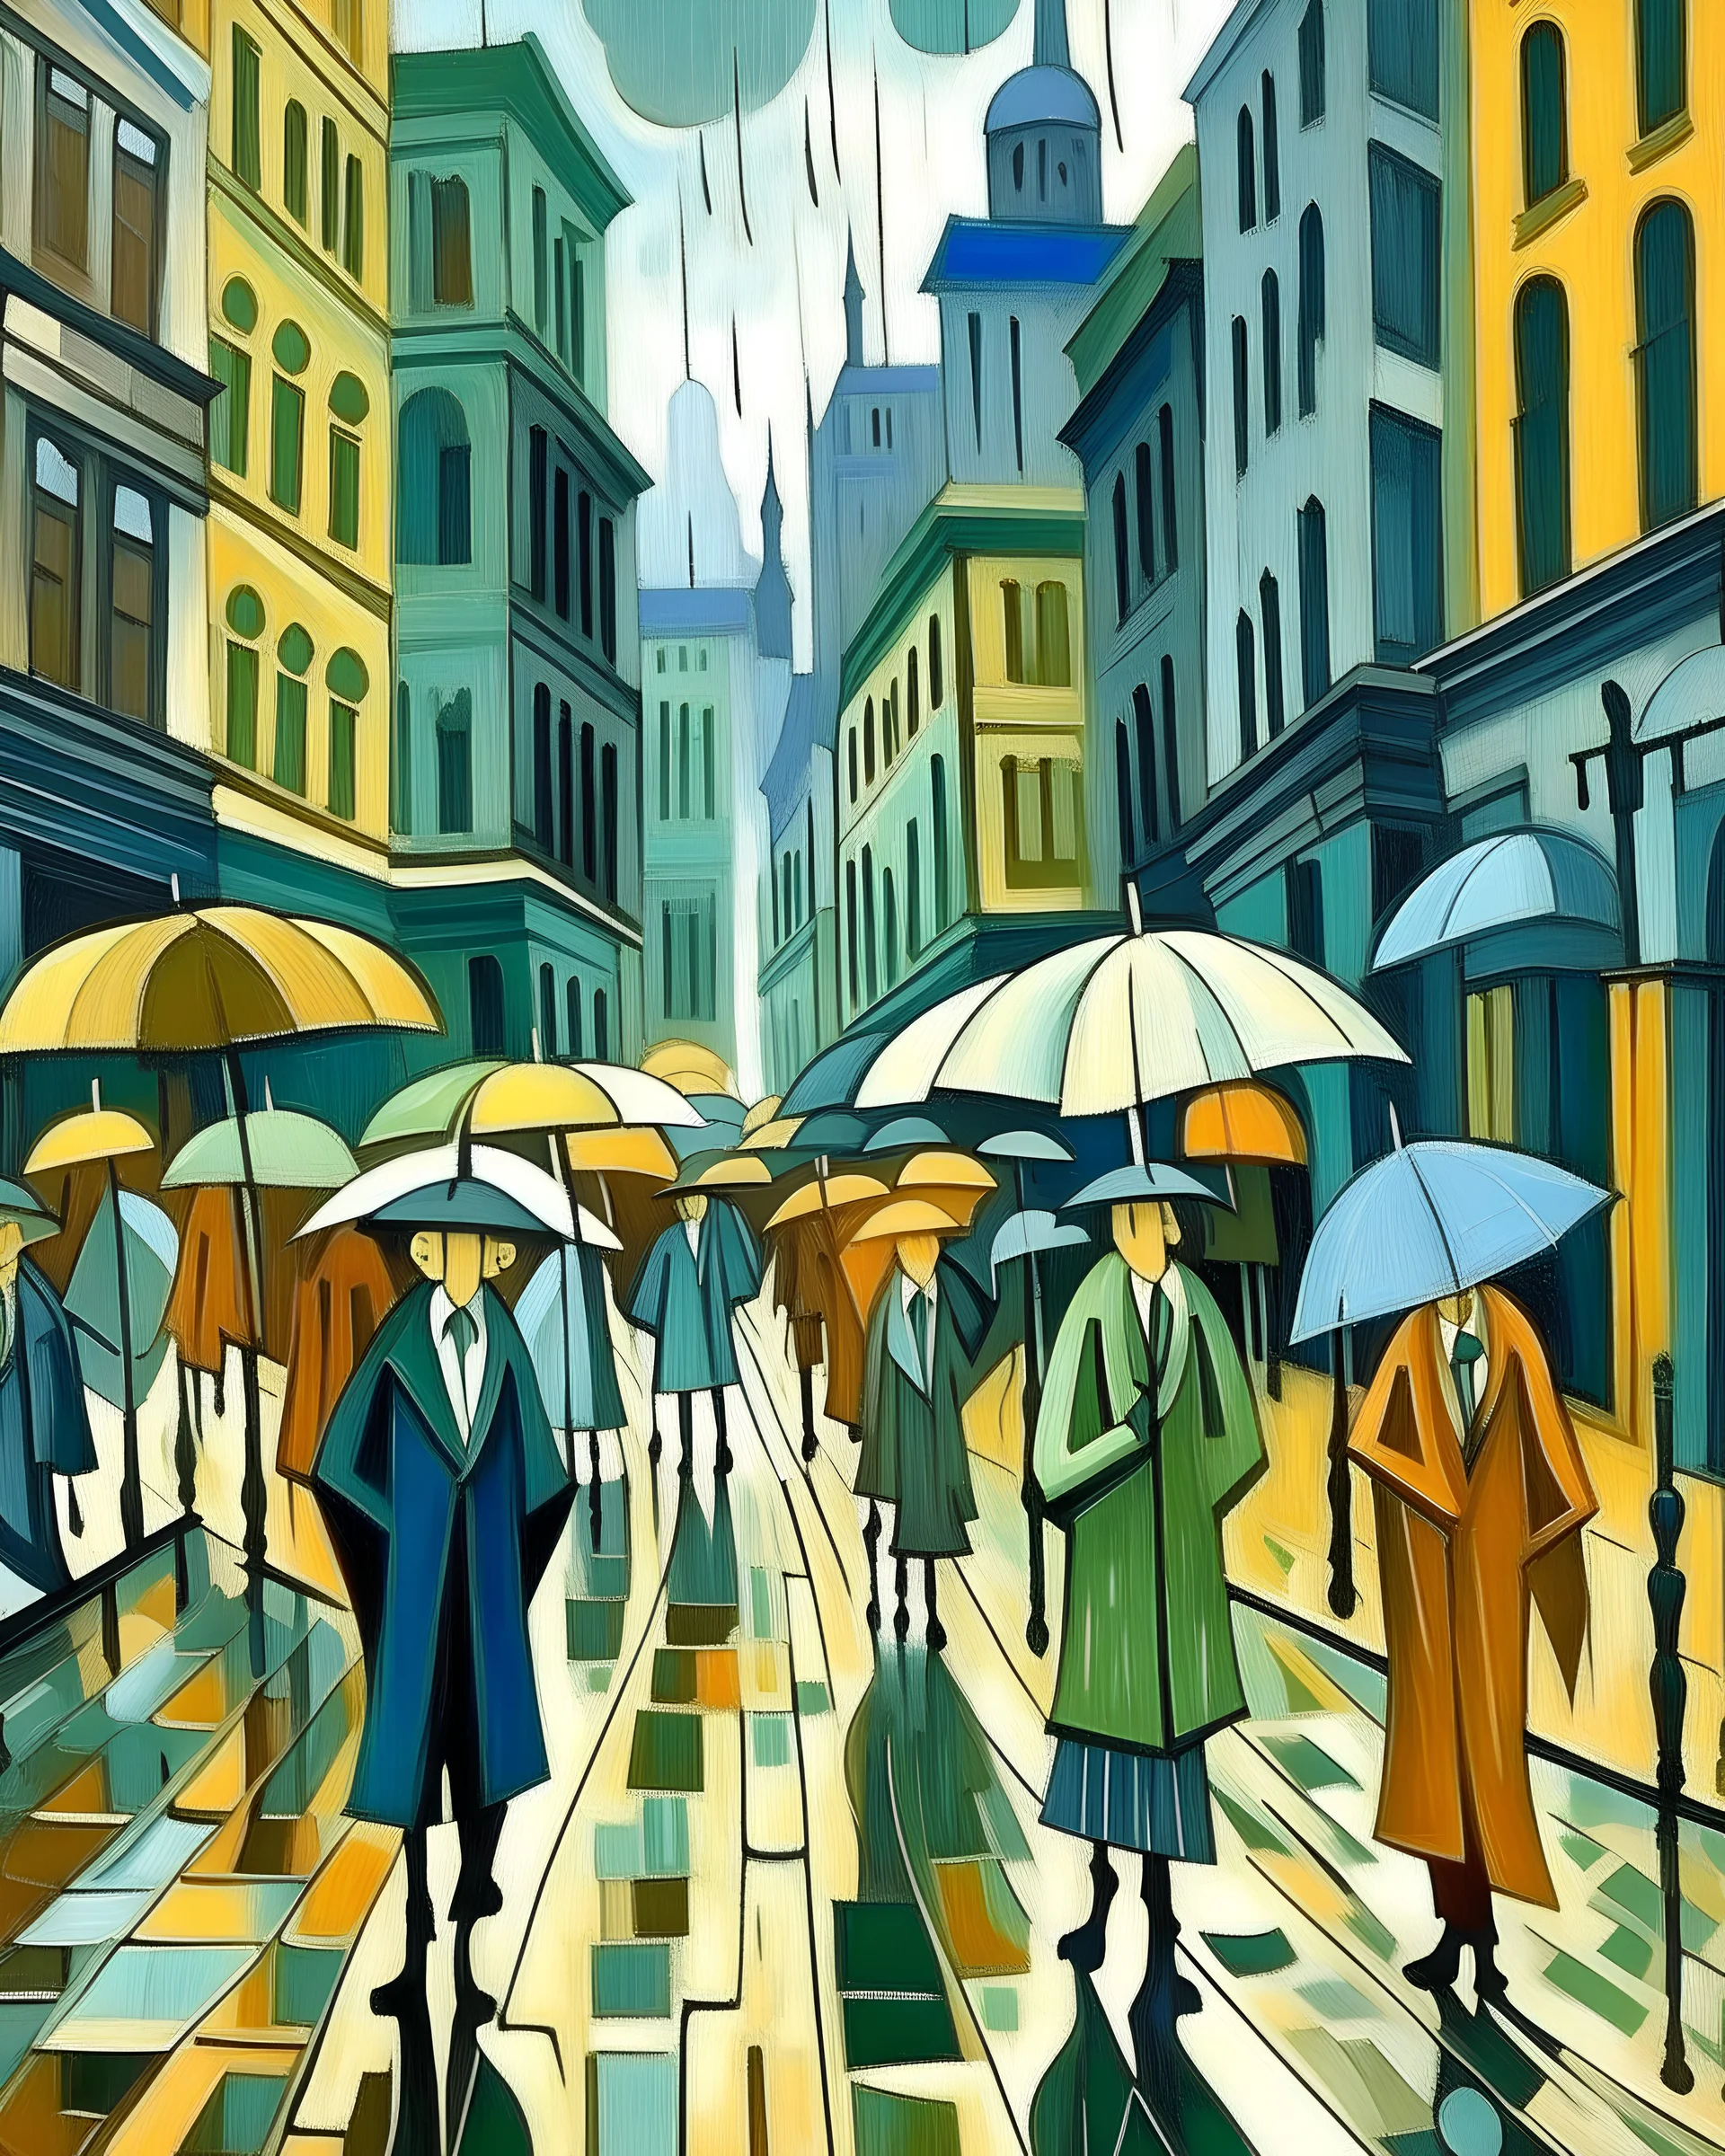 1913 cubism style, wet day in the city